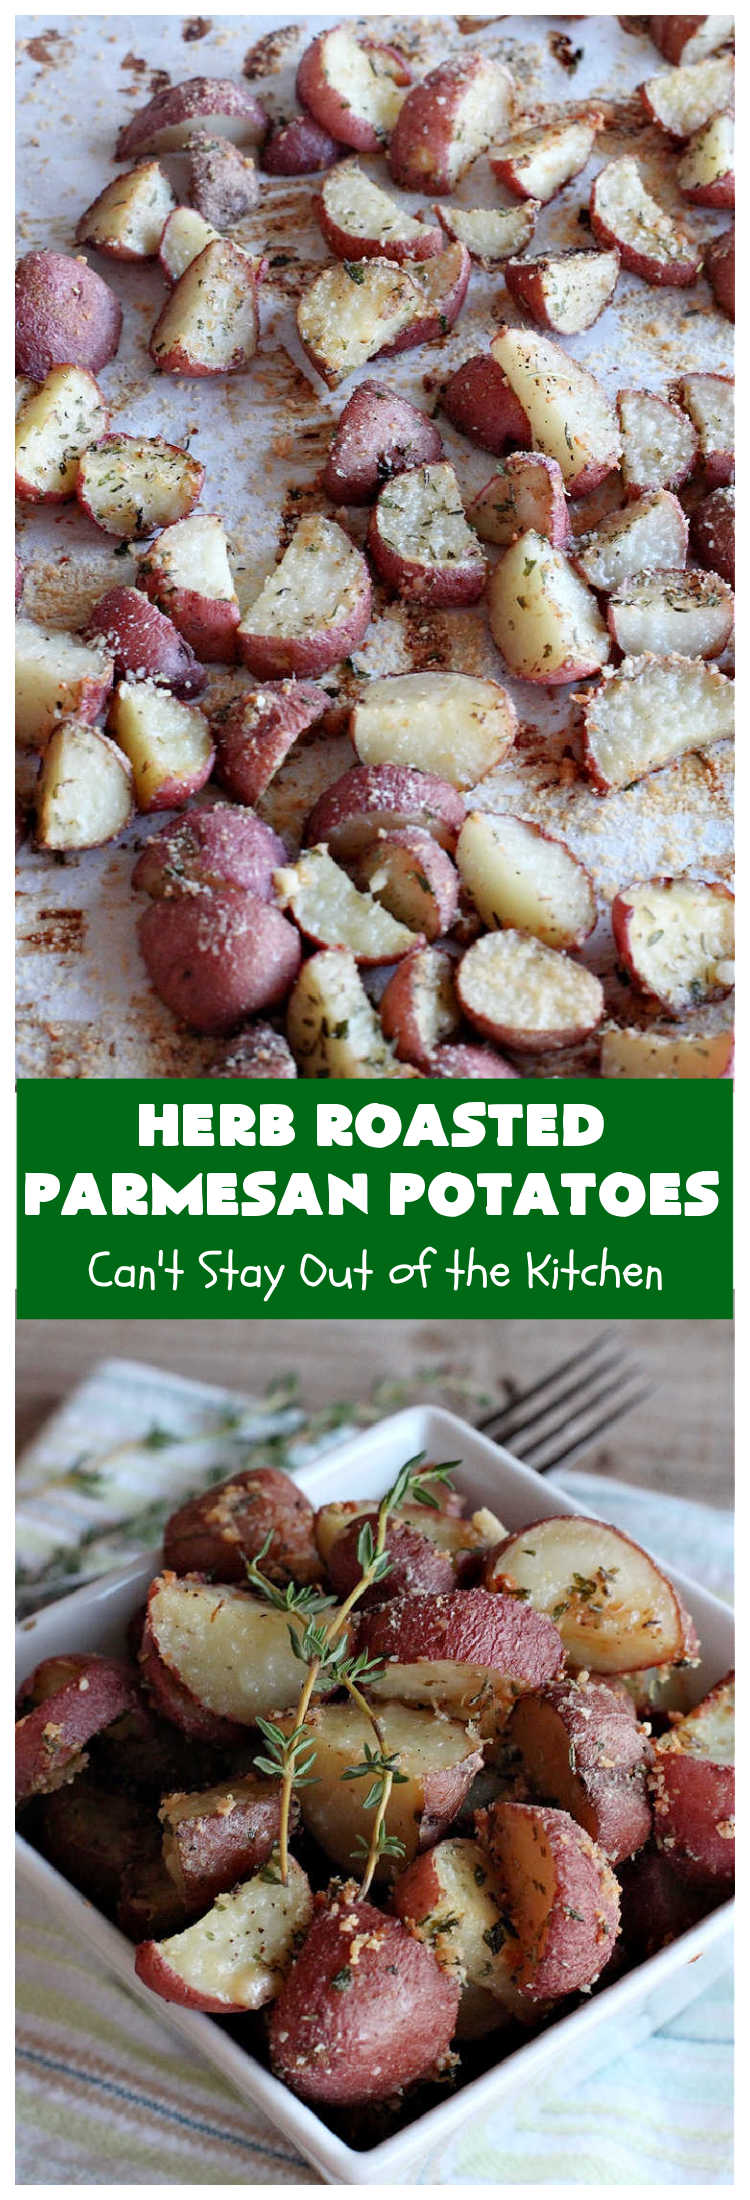 Herb Roasted Parmesan Potatoes | Can't Stay Out of the Kitchen